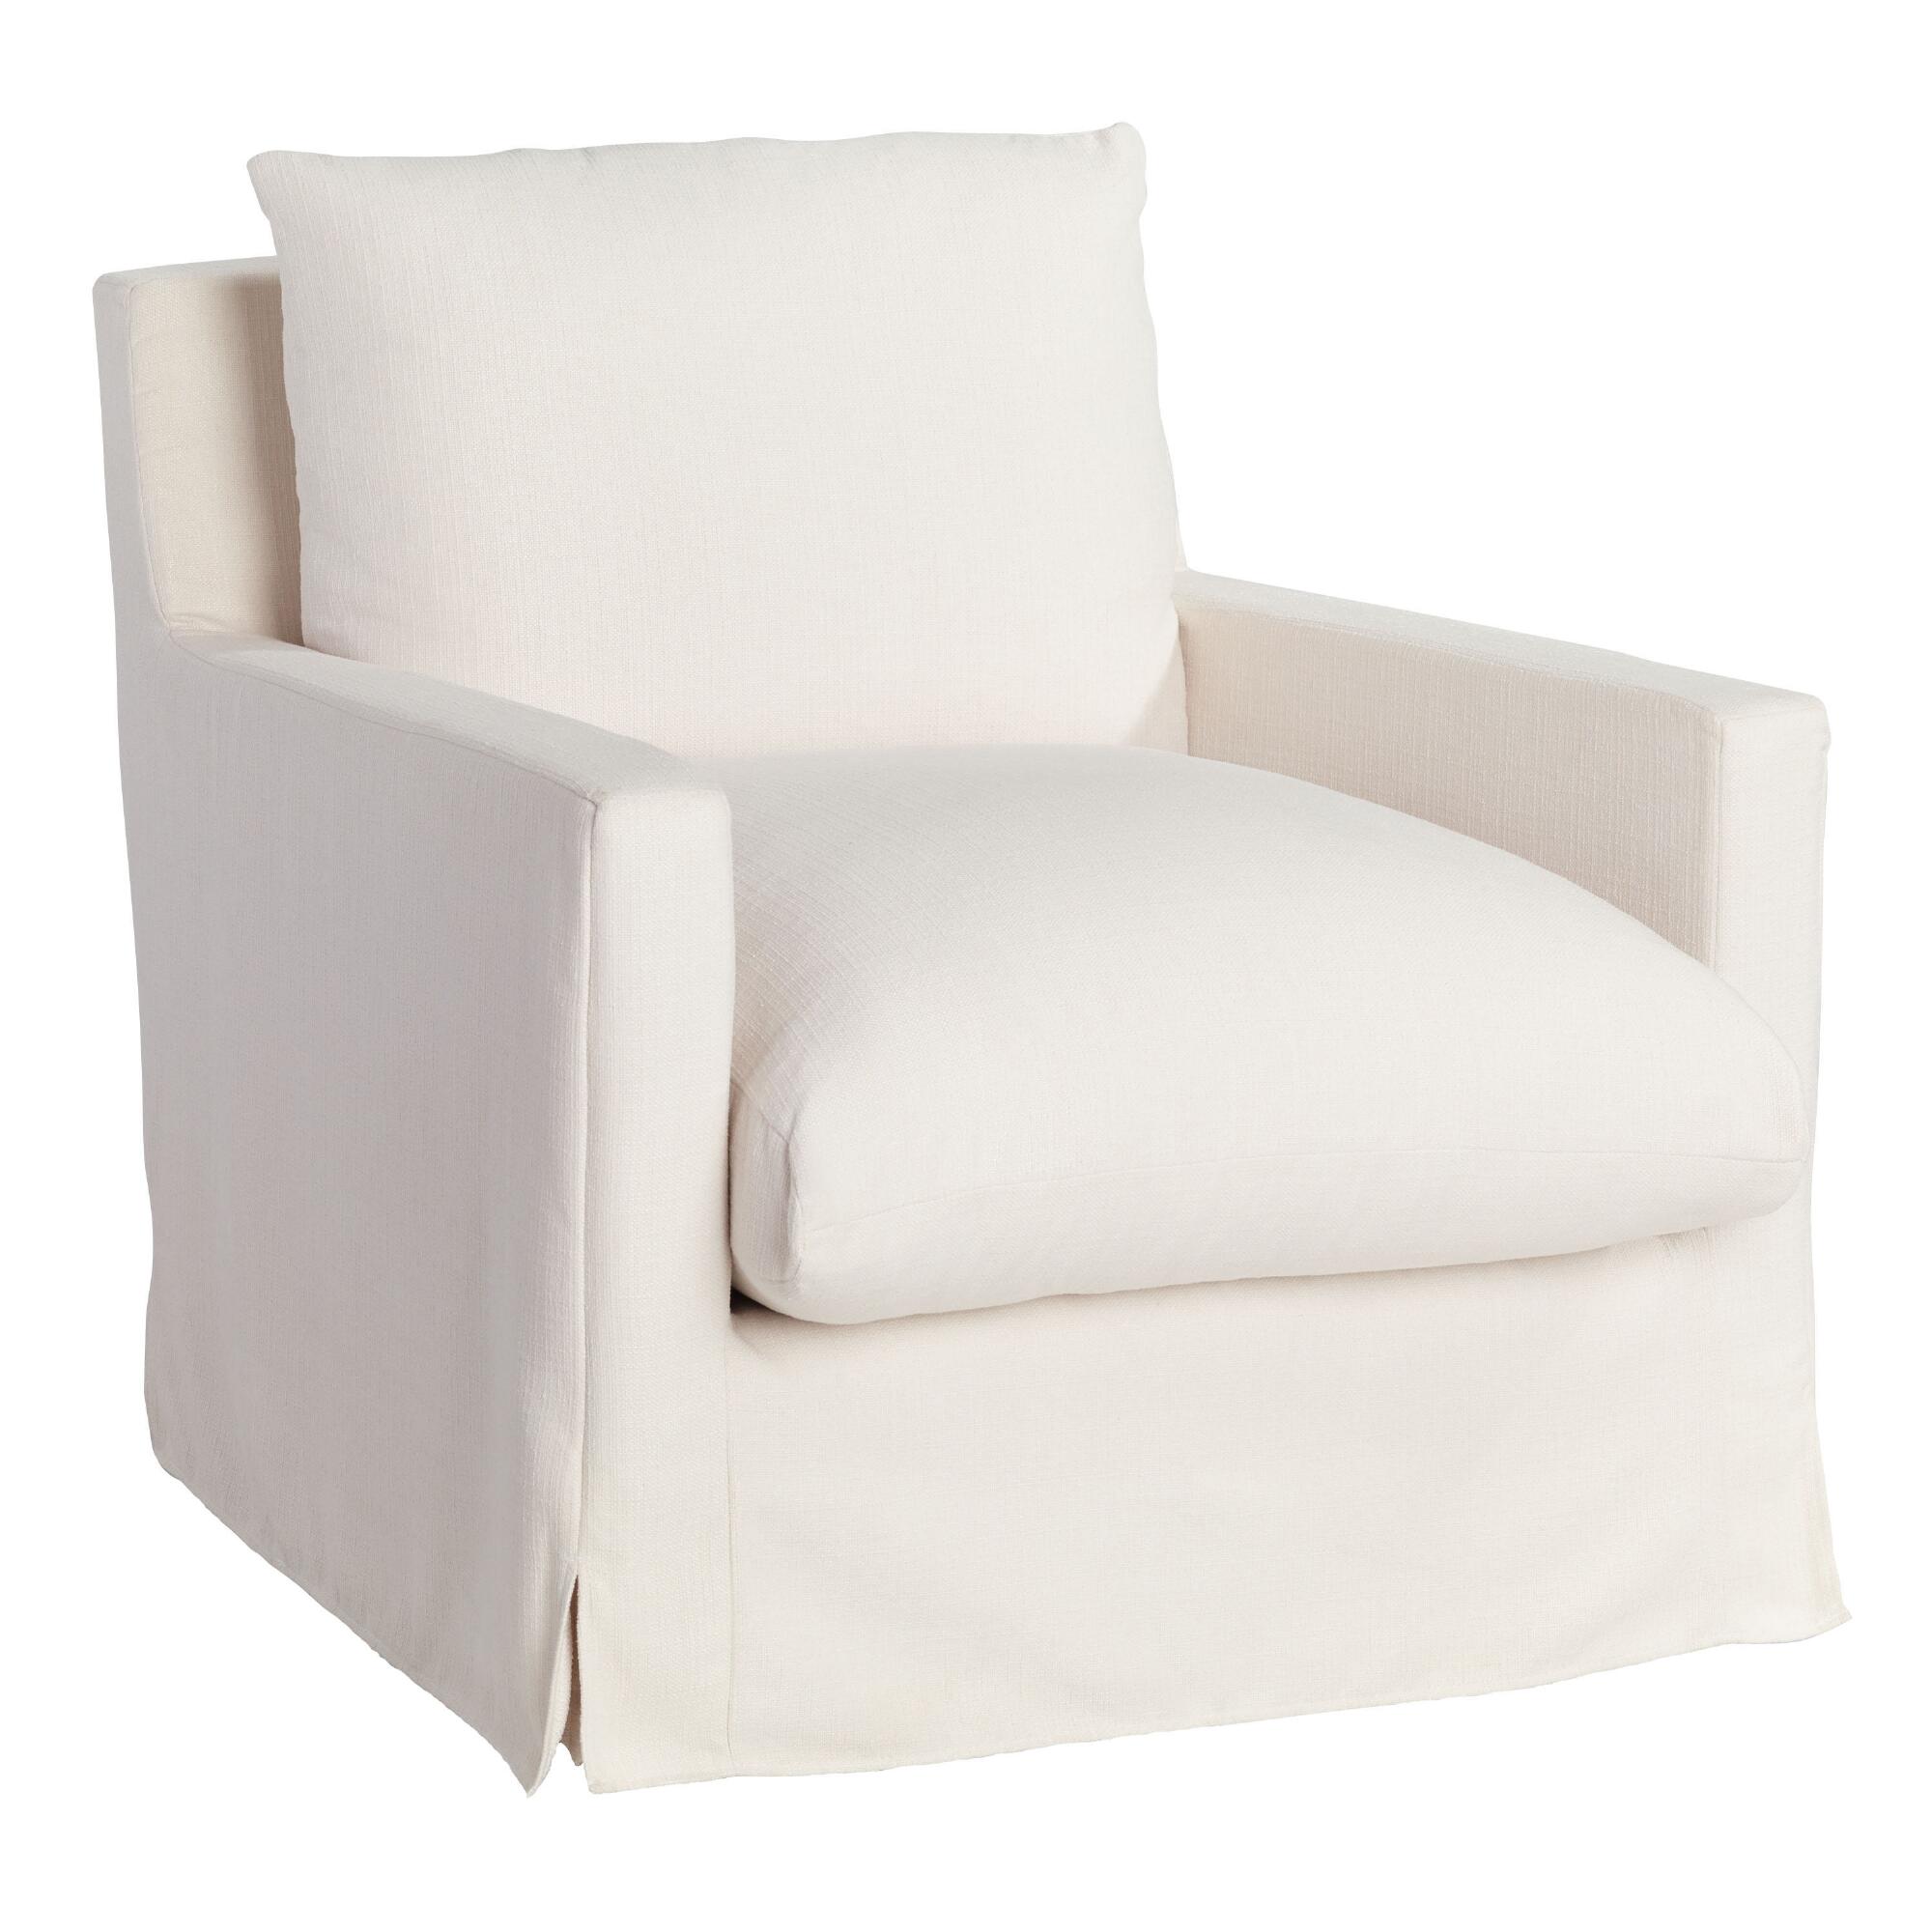 Ivory Feather Filled Brynn Swivel Chair by World Market